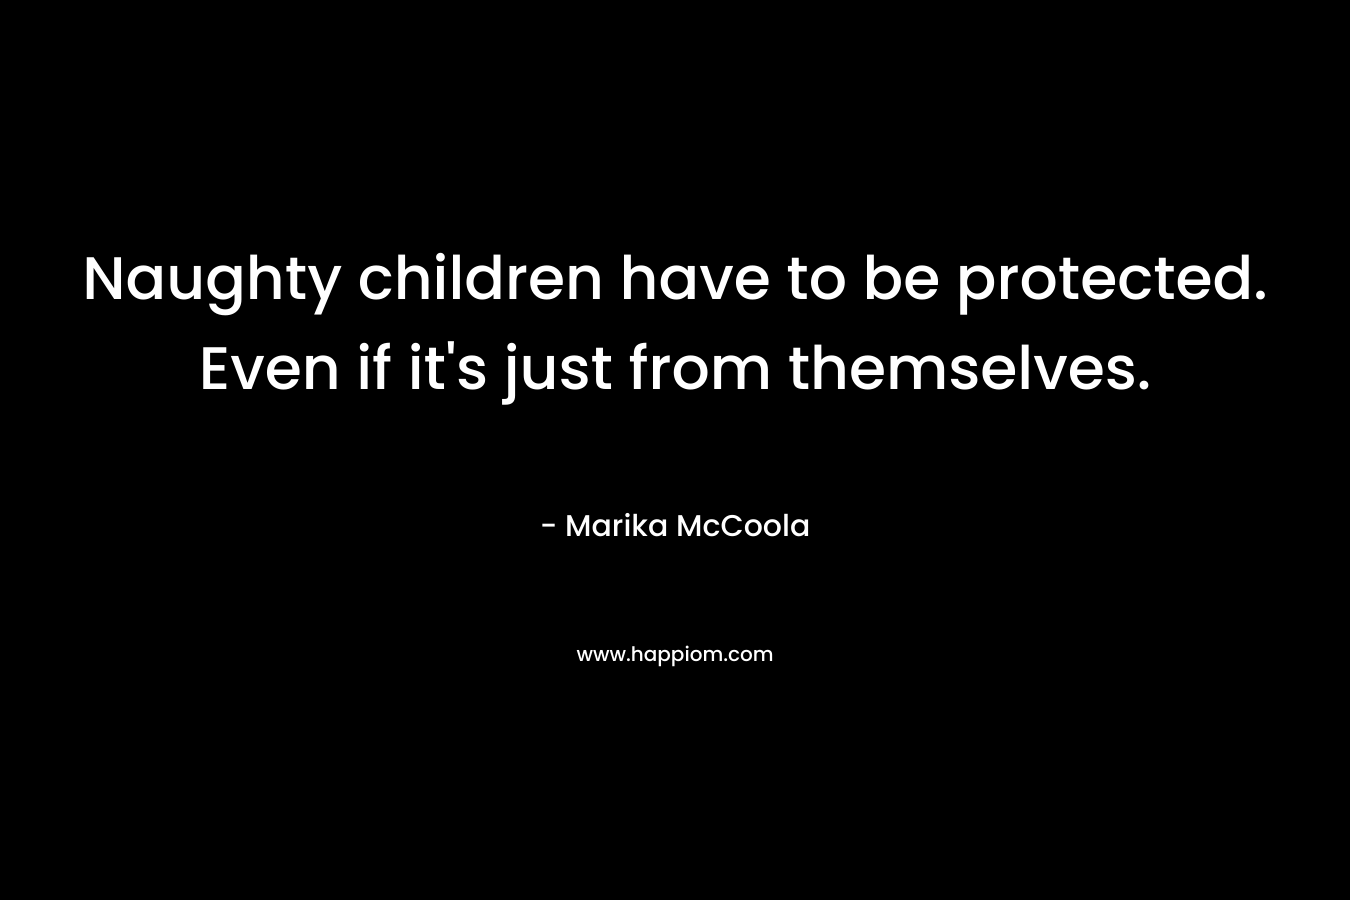 Naughty children have to be protected. Even if it's just from themselves.